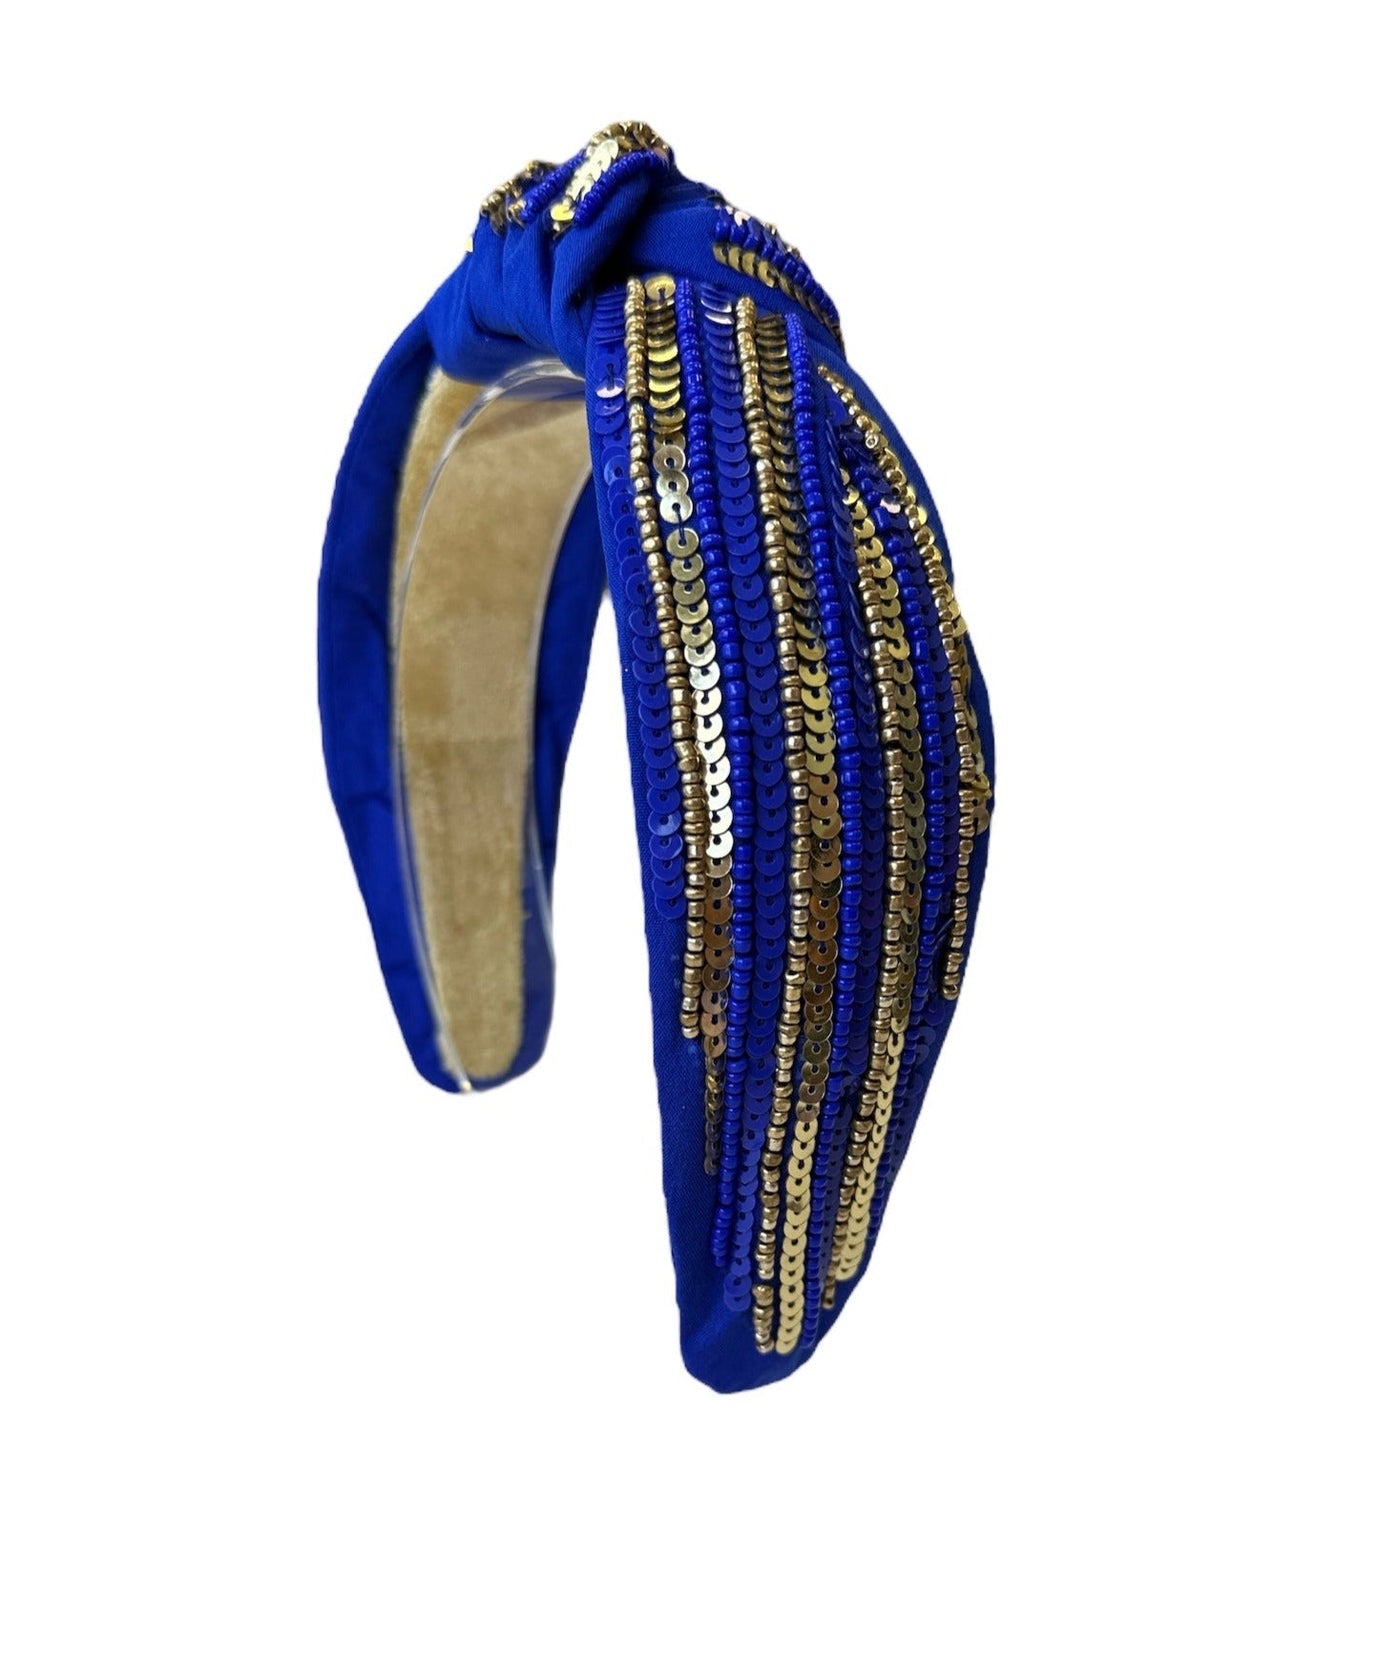 Headband Knot - Sequin Stripe - Royal Blue and Gold